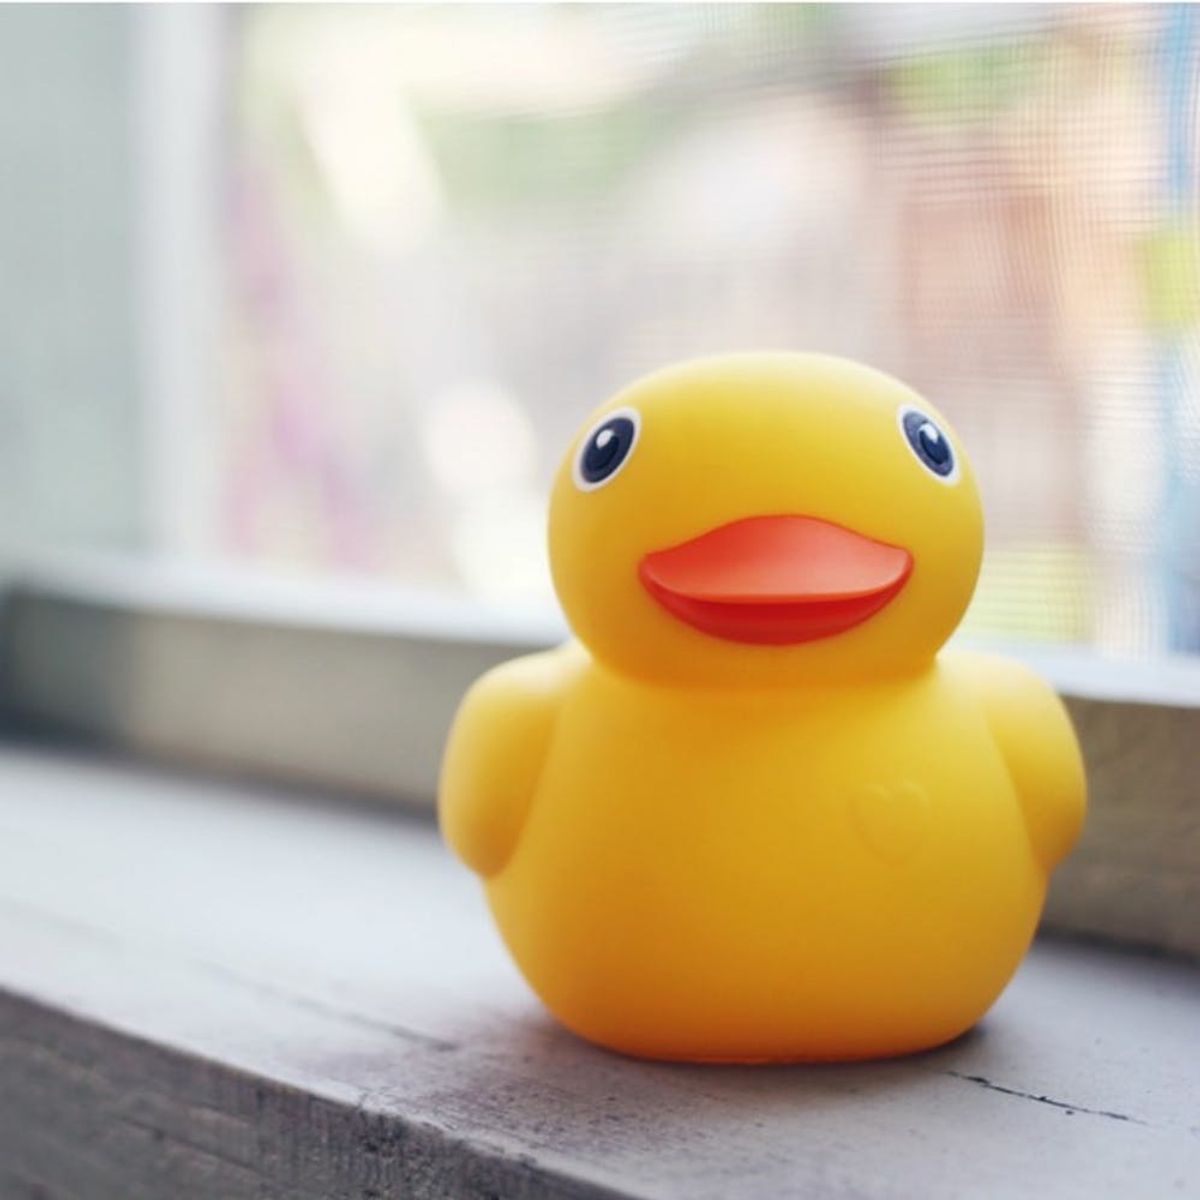 Snag This Rubber Ducky to Supercharge Bath Time 